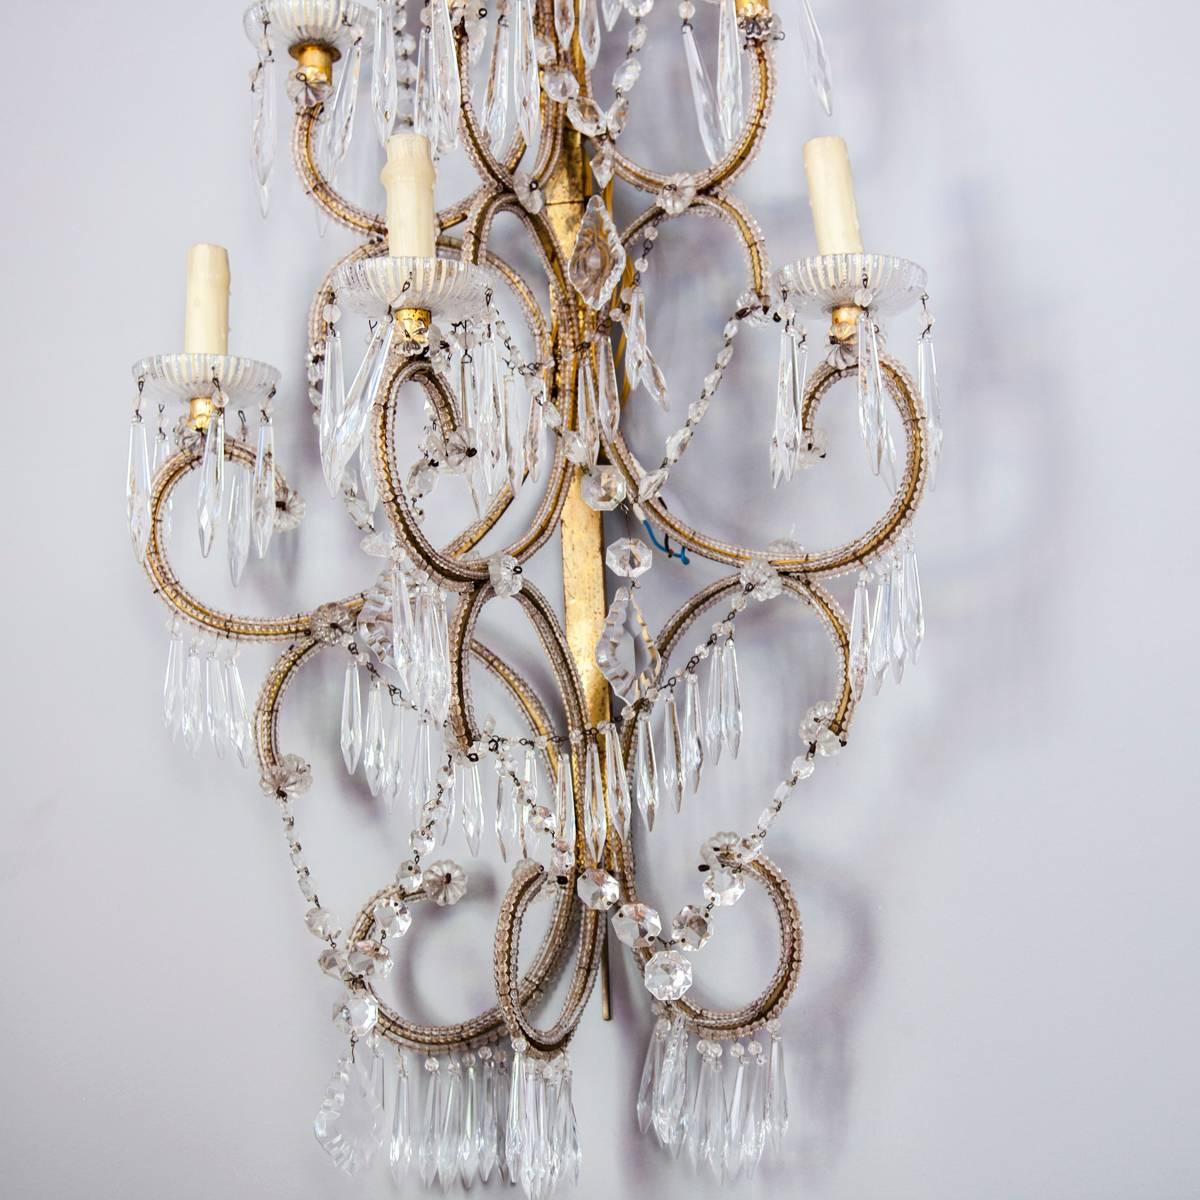 Pair of sconces, in the Italian Maria Theresa style, each having a frame of beaded gilded iron, six scrolling candle arms adorned with beading, terminating in scalloped glass bobeches, the entire fixture draped in swags of crystal strands, prisms